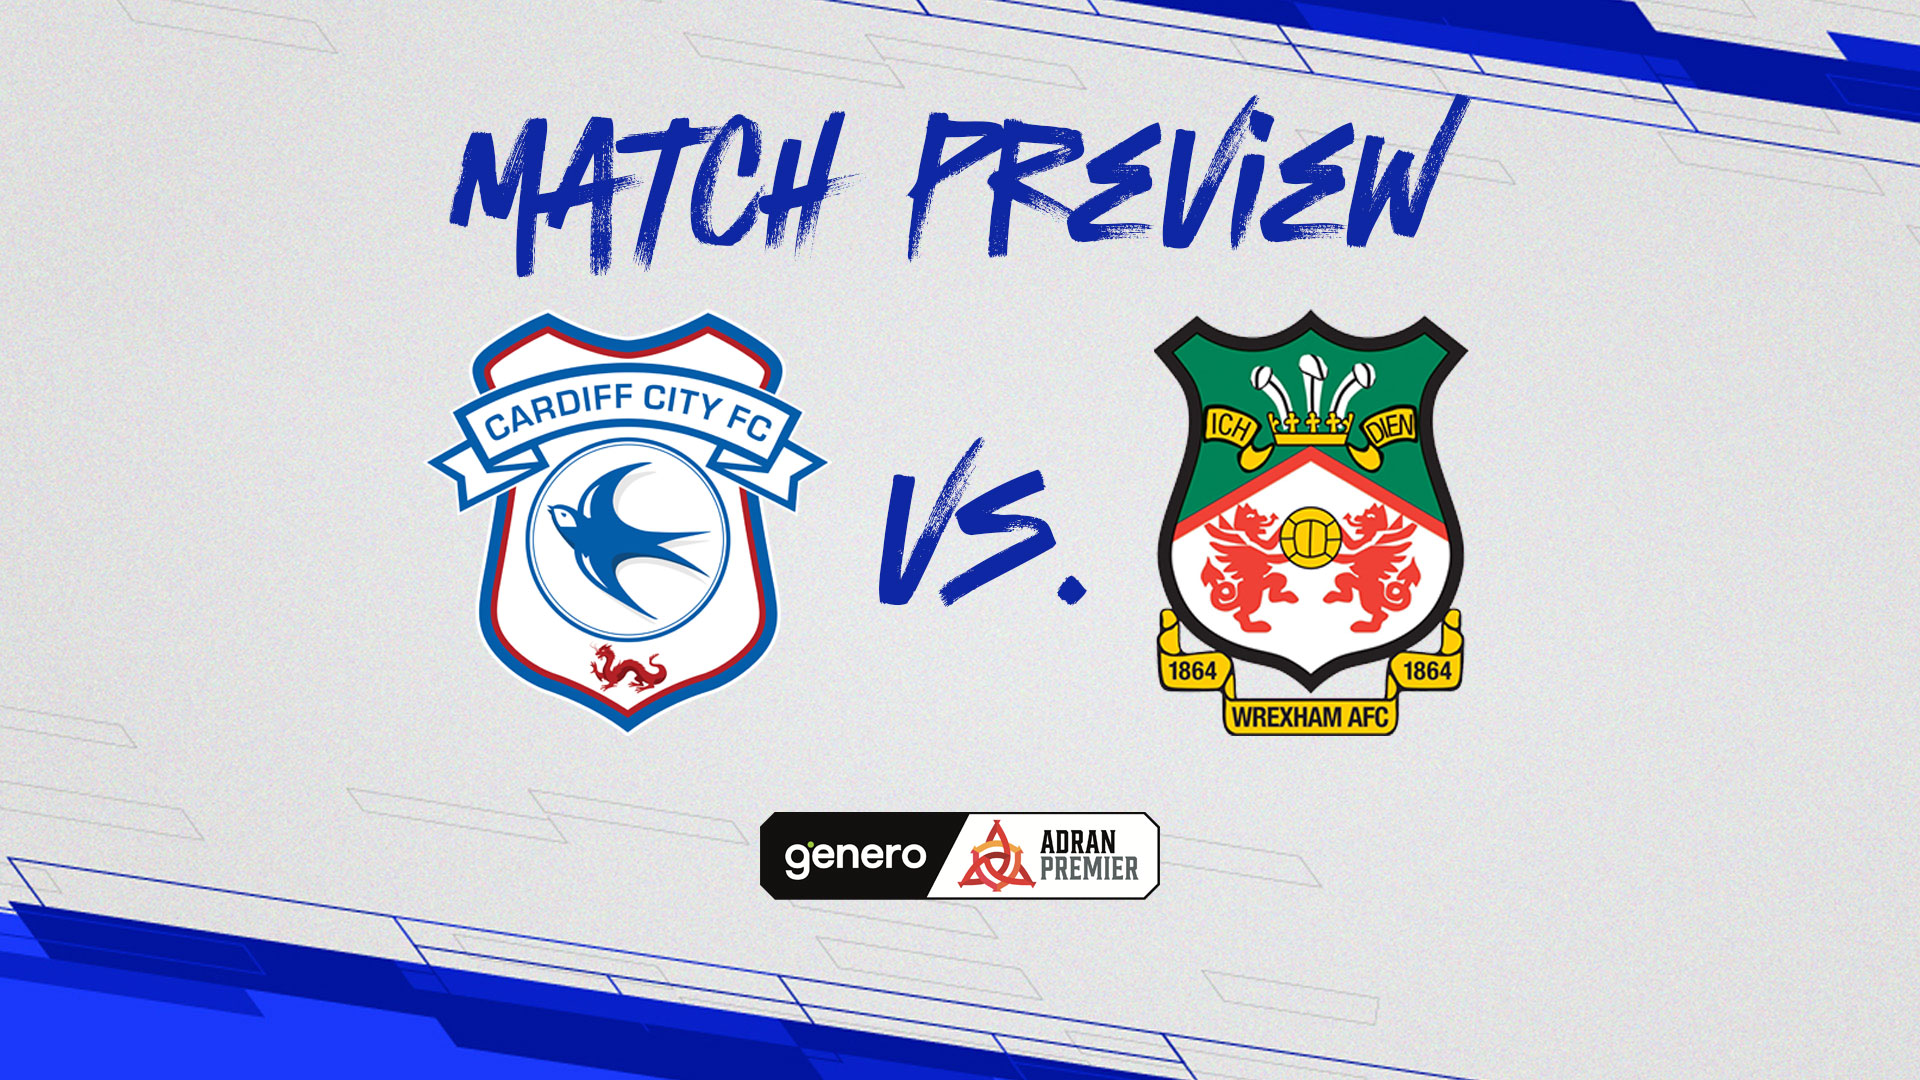 Match Preview: Cardiff City vs. Wrexham